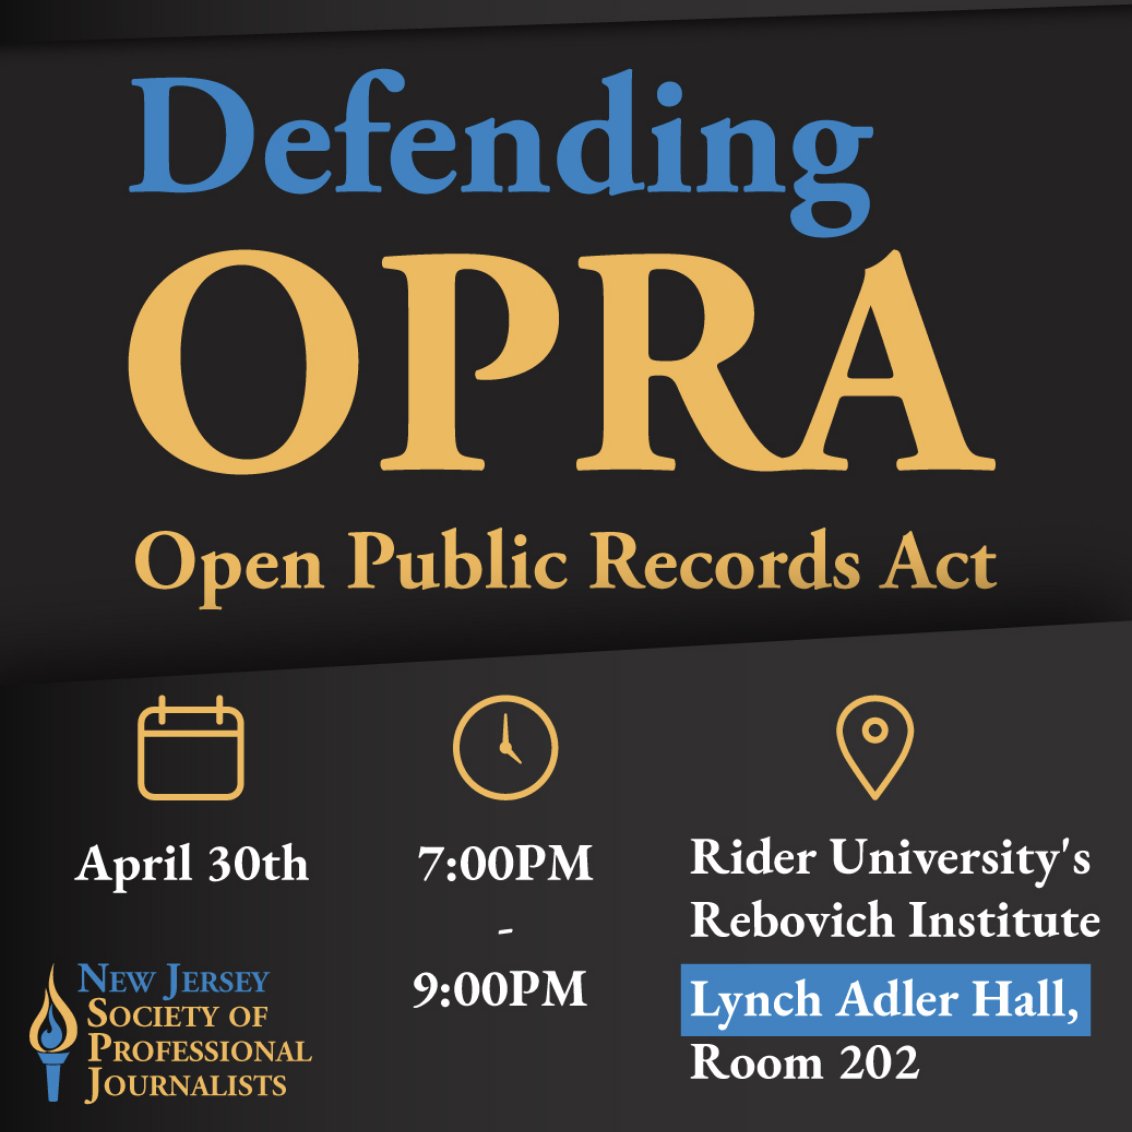 Transparency fans and good government geeks, assemble! This is happening TONIGHT at Rider University. It's free and open to the public. Or stream here: njspj.org/defendingopra2…